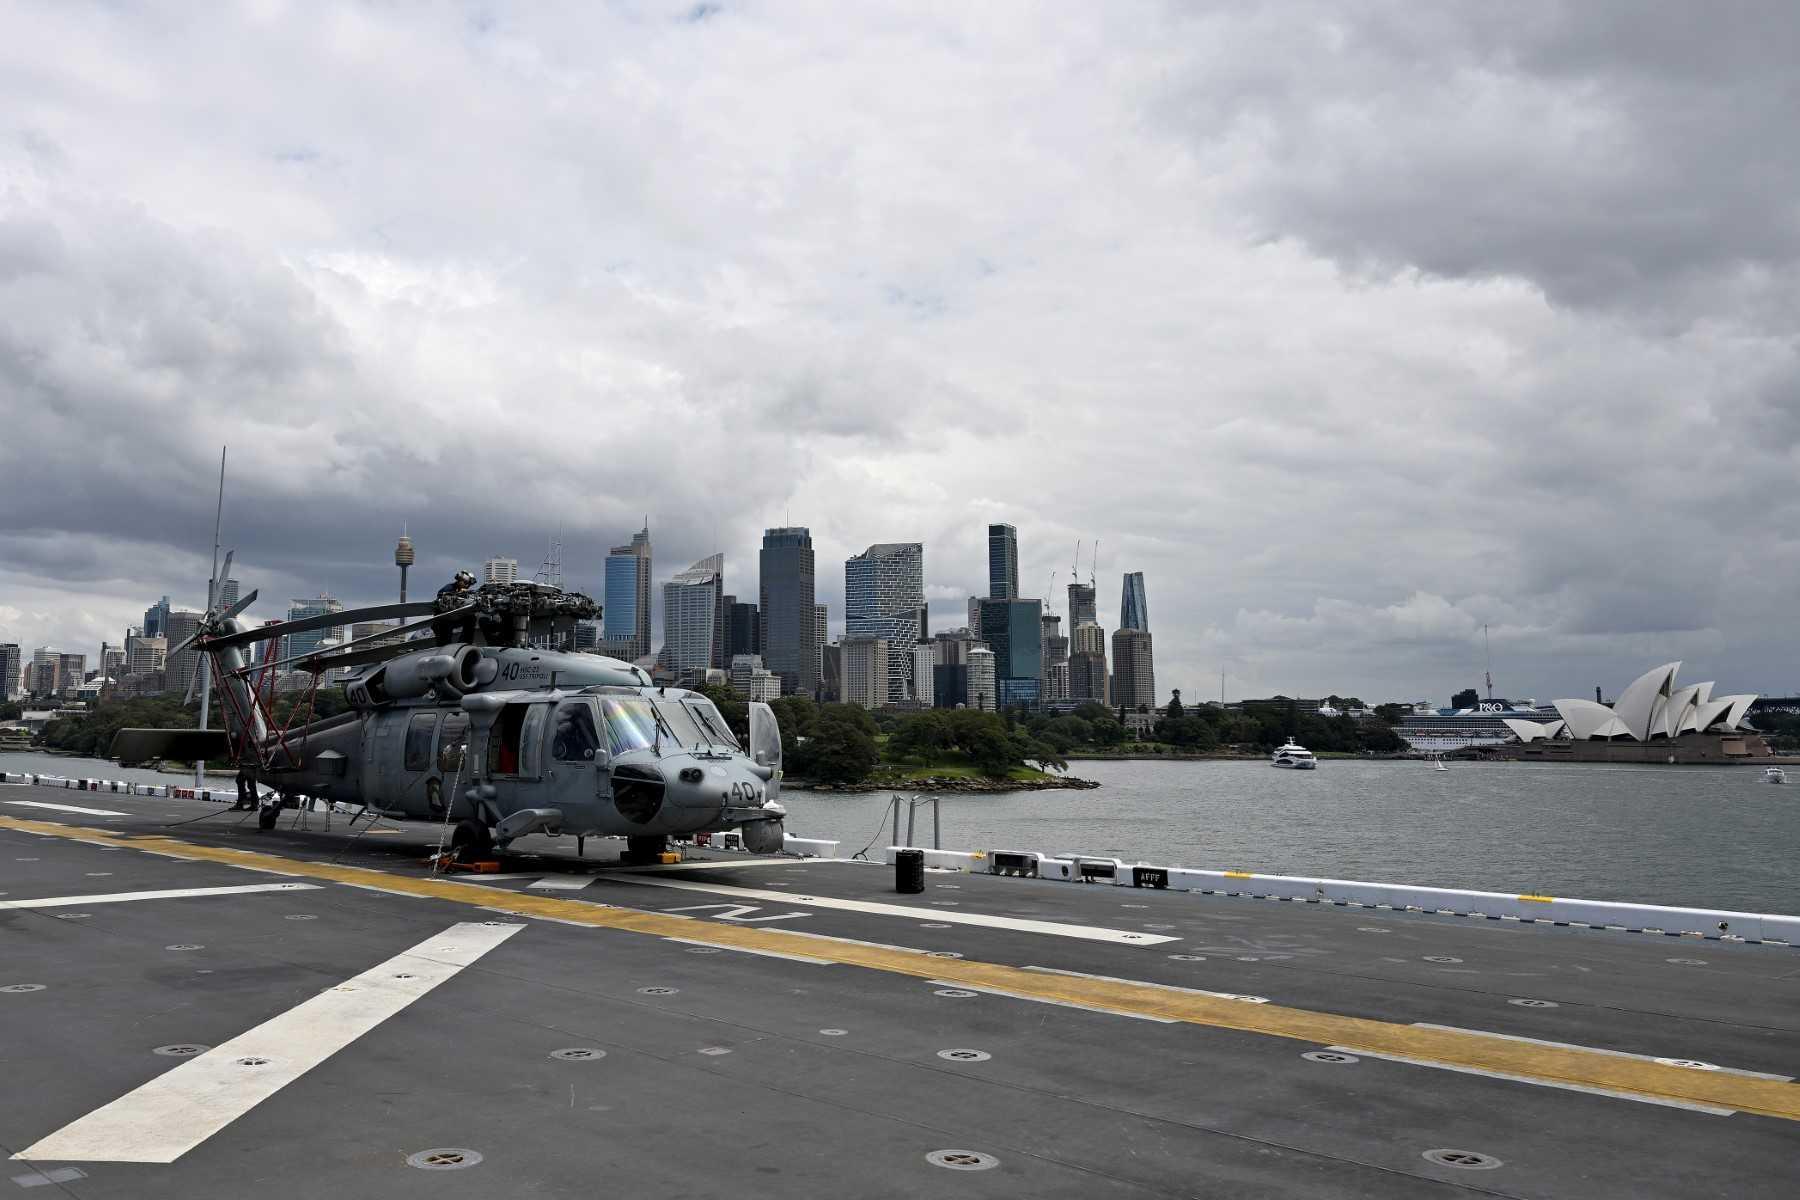 An MH-60 Seahawk flown by Helicopter Sea Combat Squadron 23 is seen on the flight deck of an amphibious assault ship while docked at fleet base in Sydney on Nov 4. Photo: AFP 